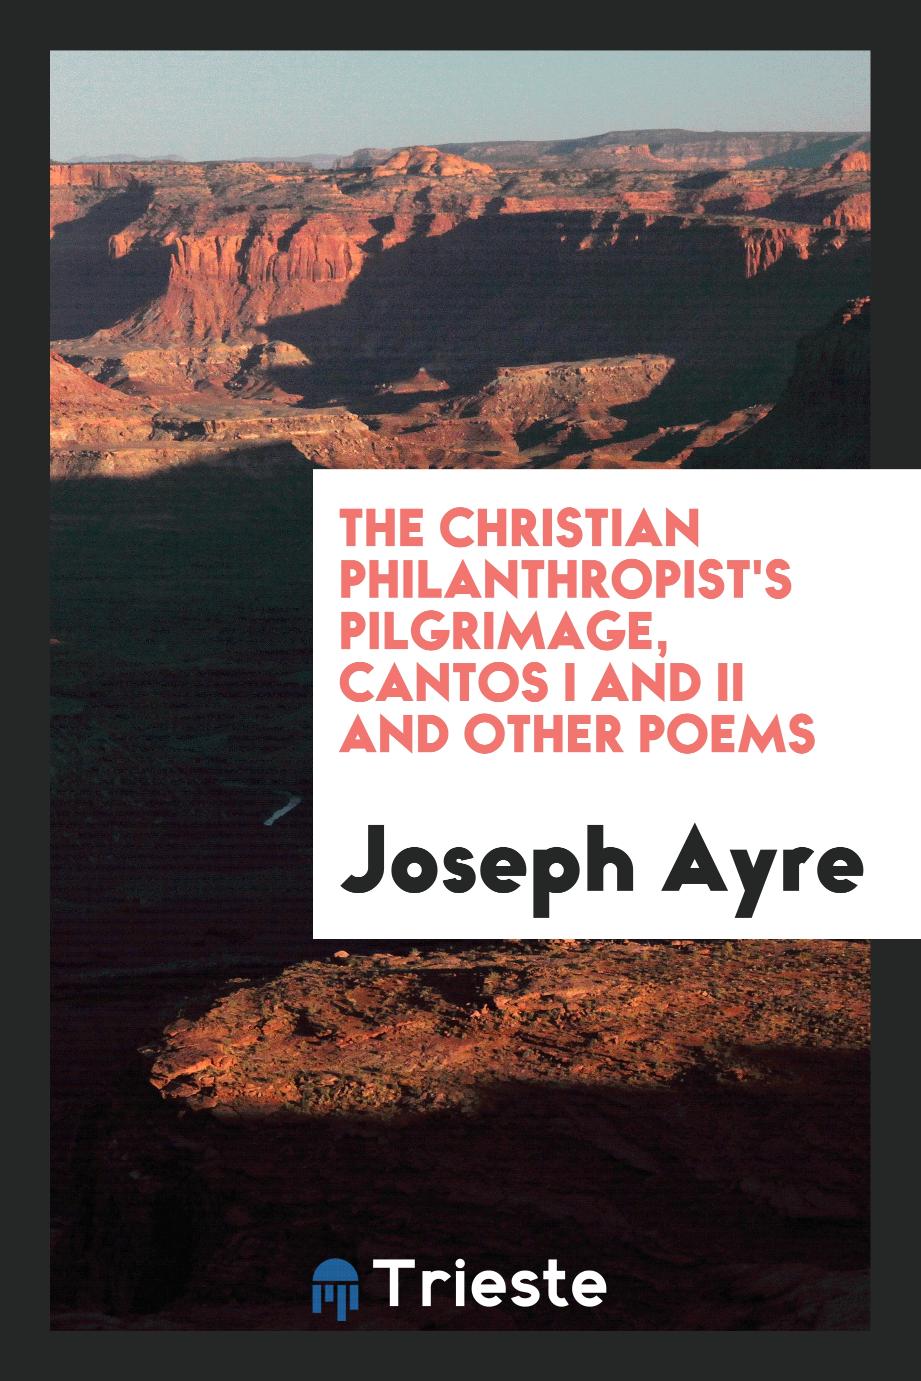 The Christian Philanthropist's Pilgrimage, Cantos I and II and Other Poems